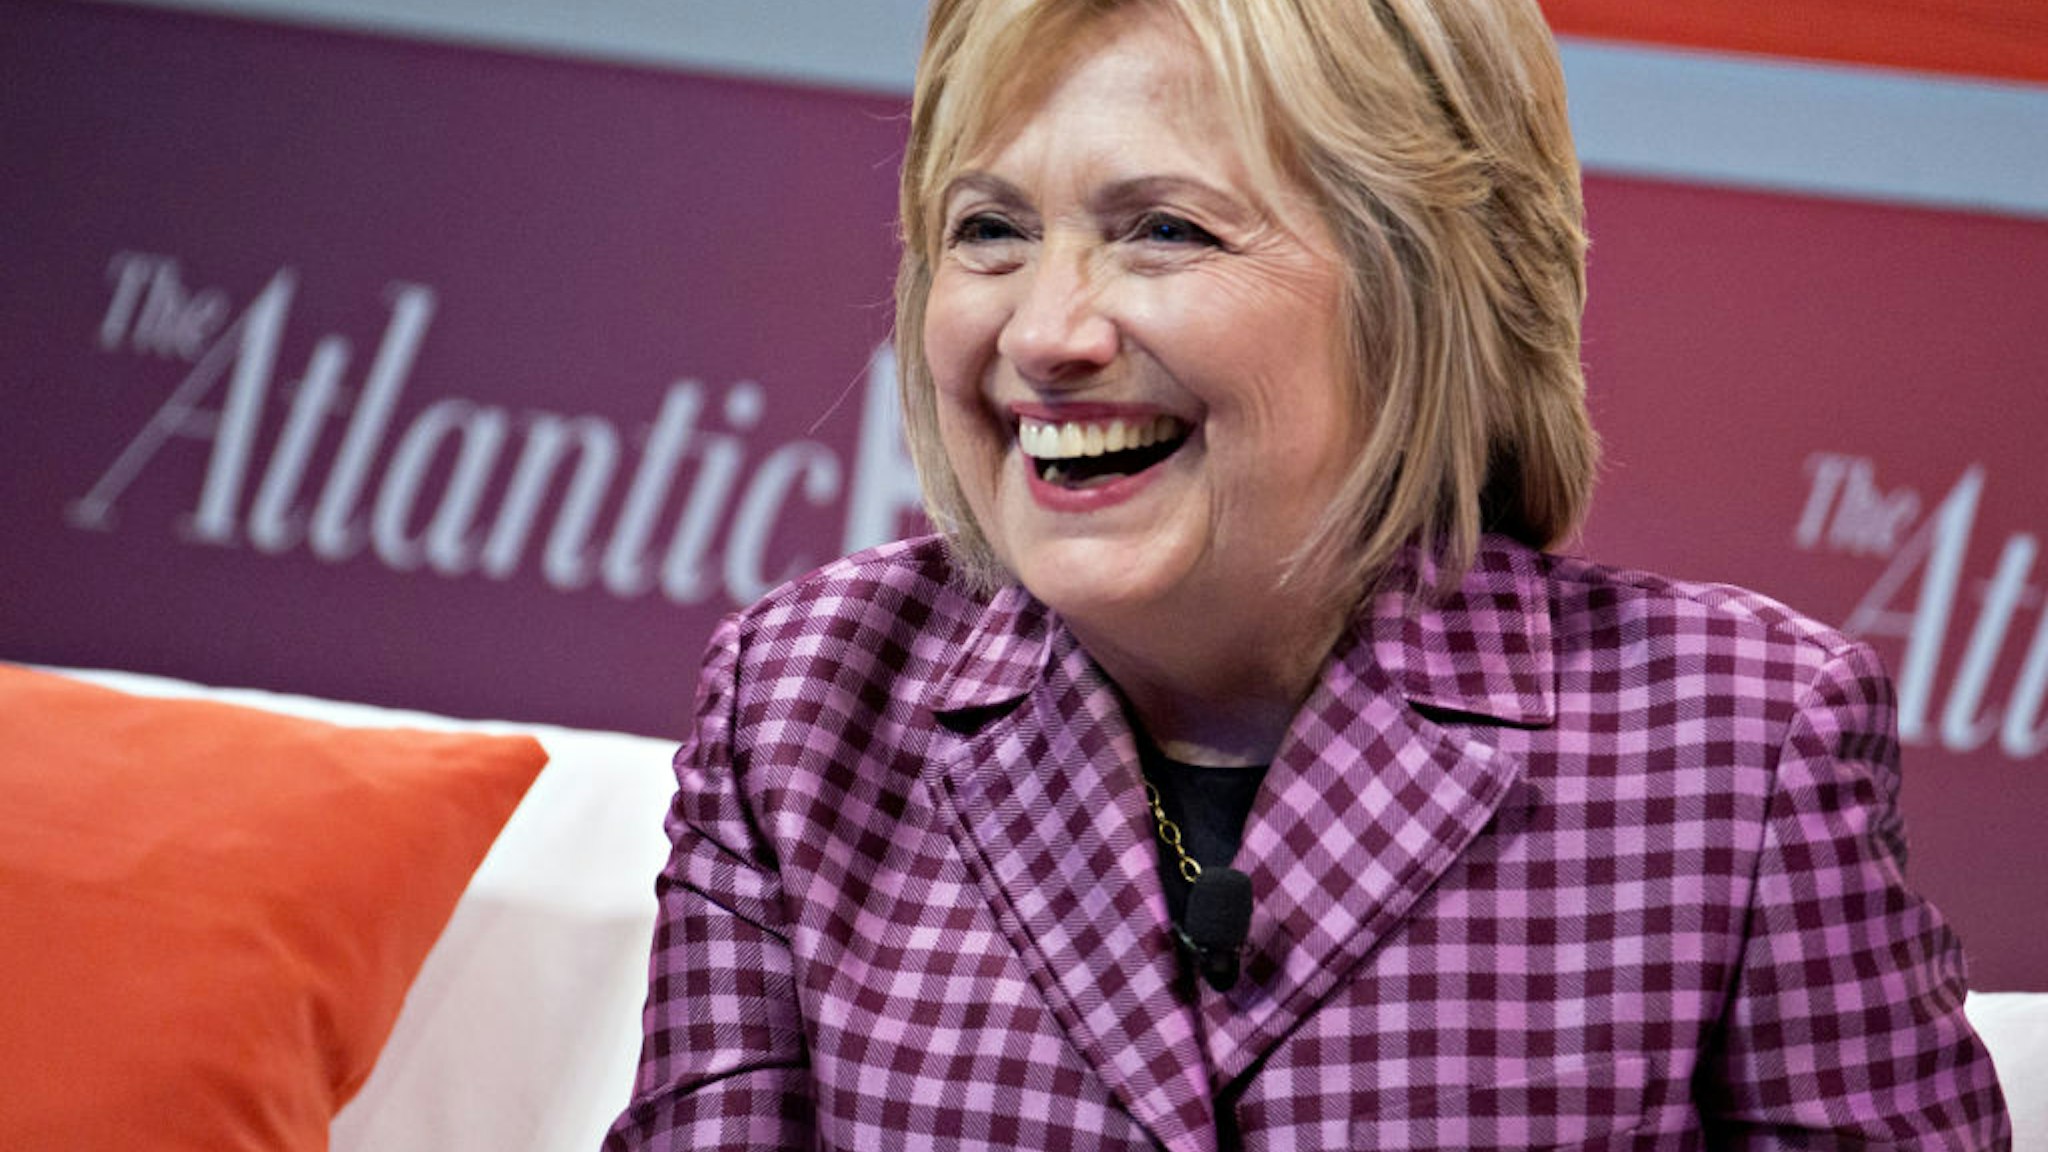 Hillary laughing